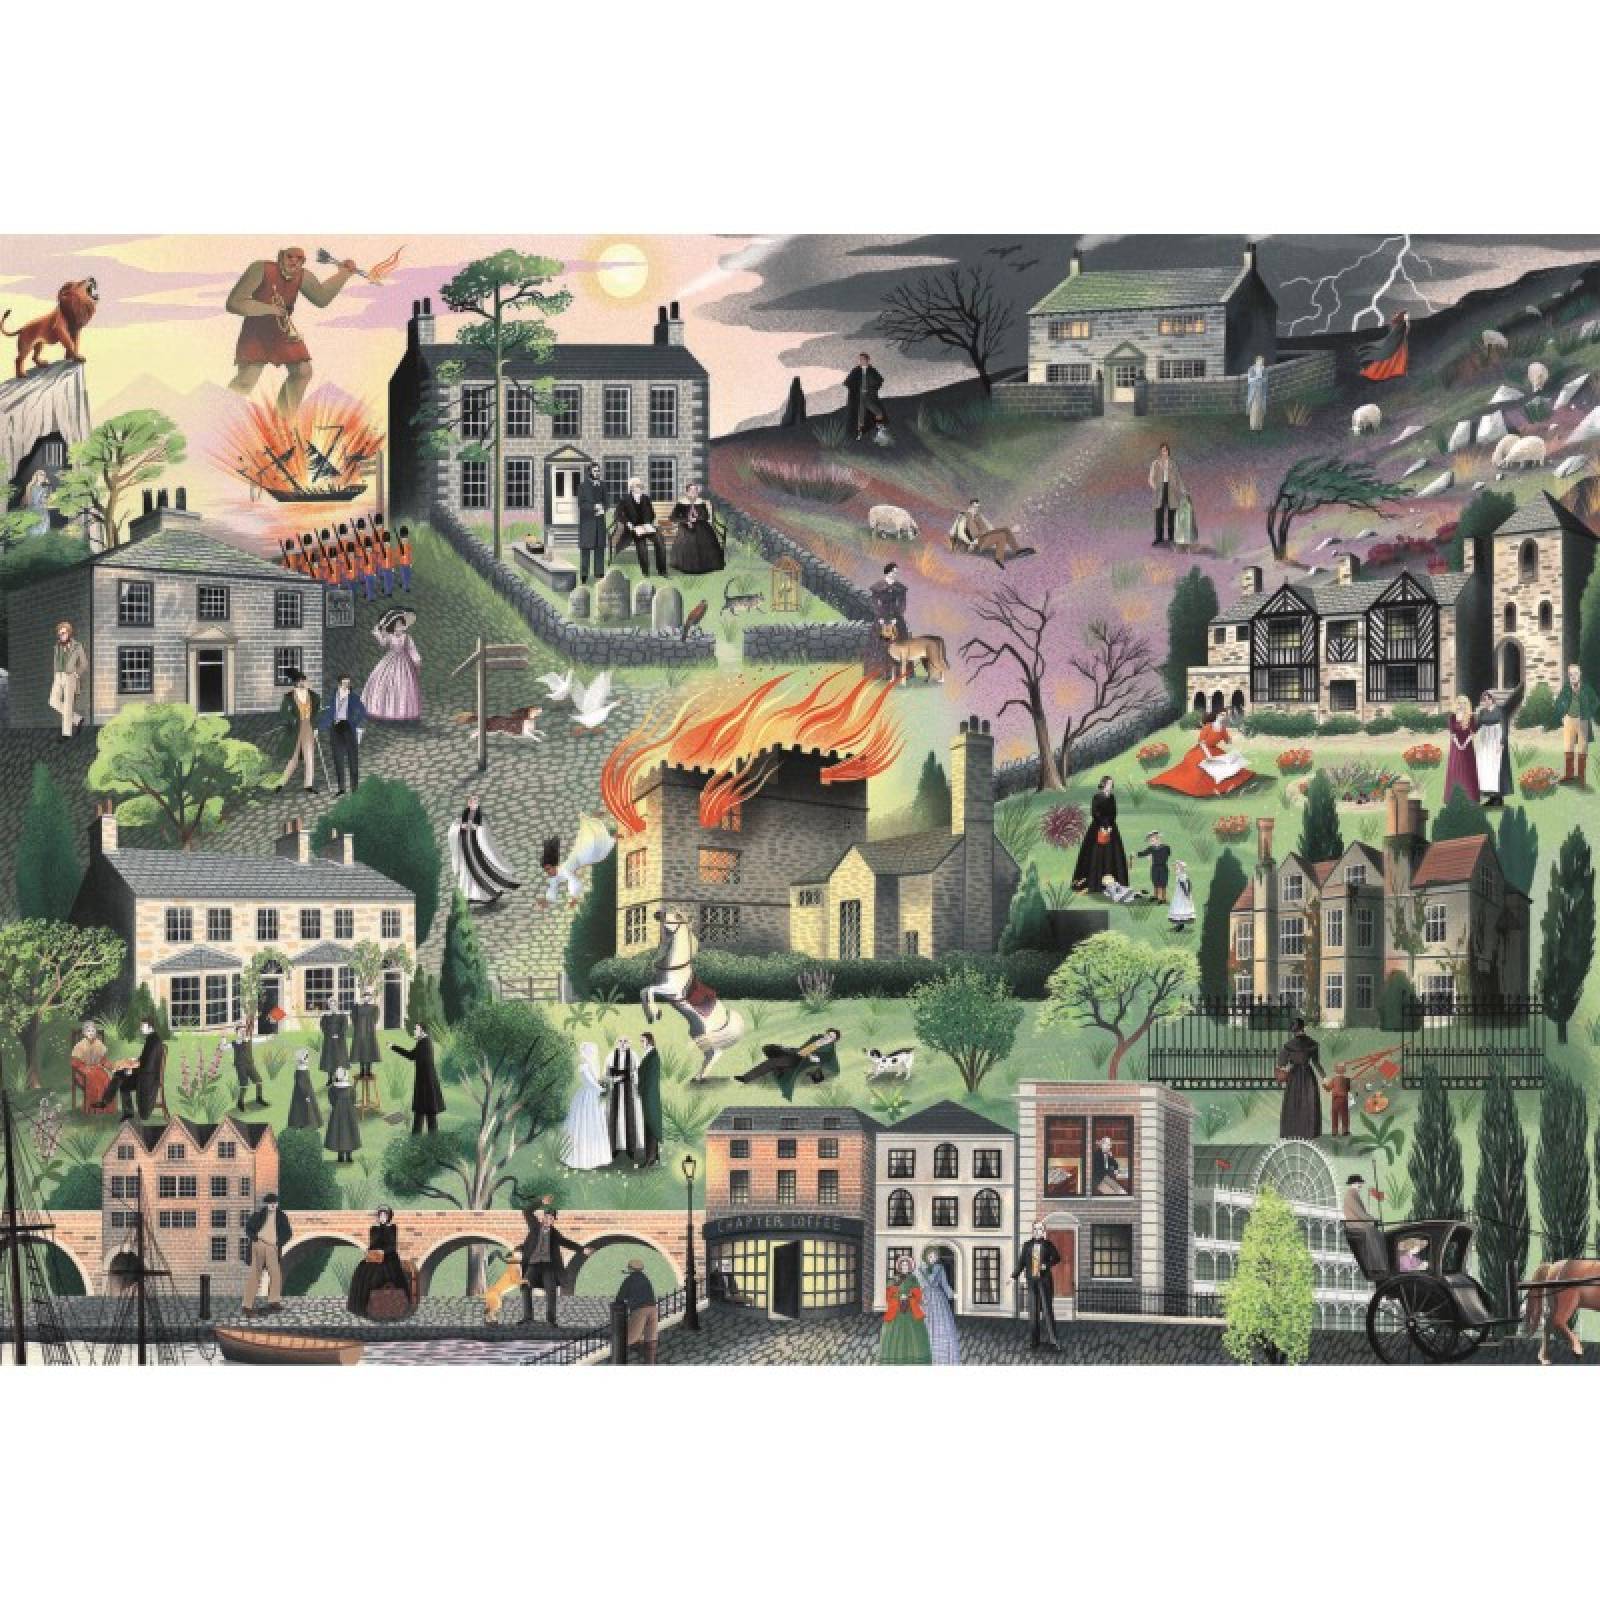 The World Of The Brontes - 1000 Piece Jigsaw Puzzle thumbnails